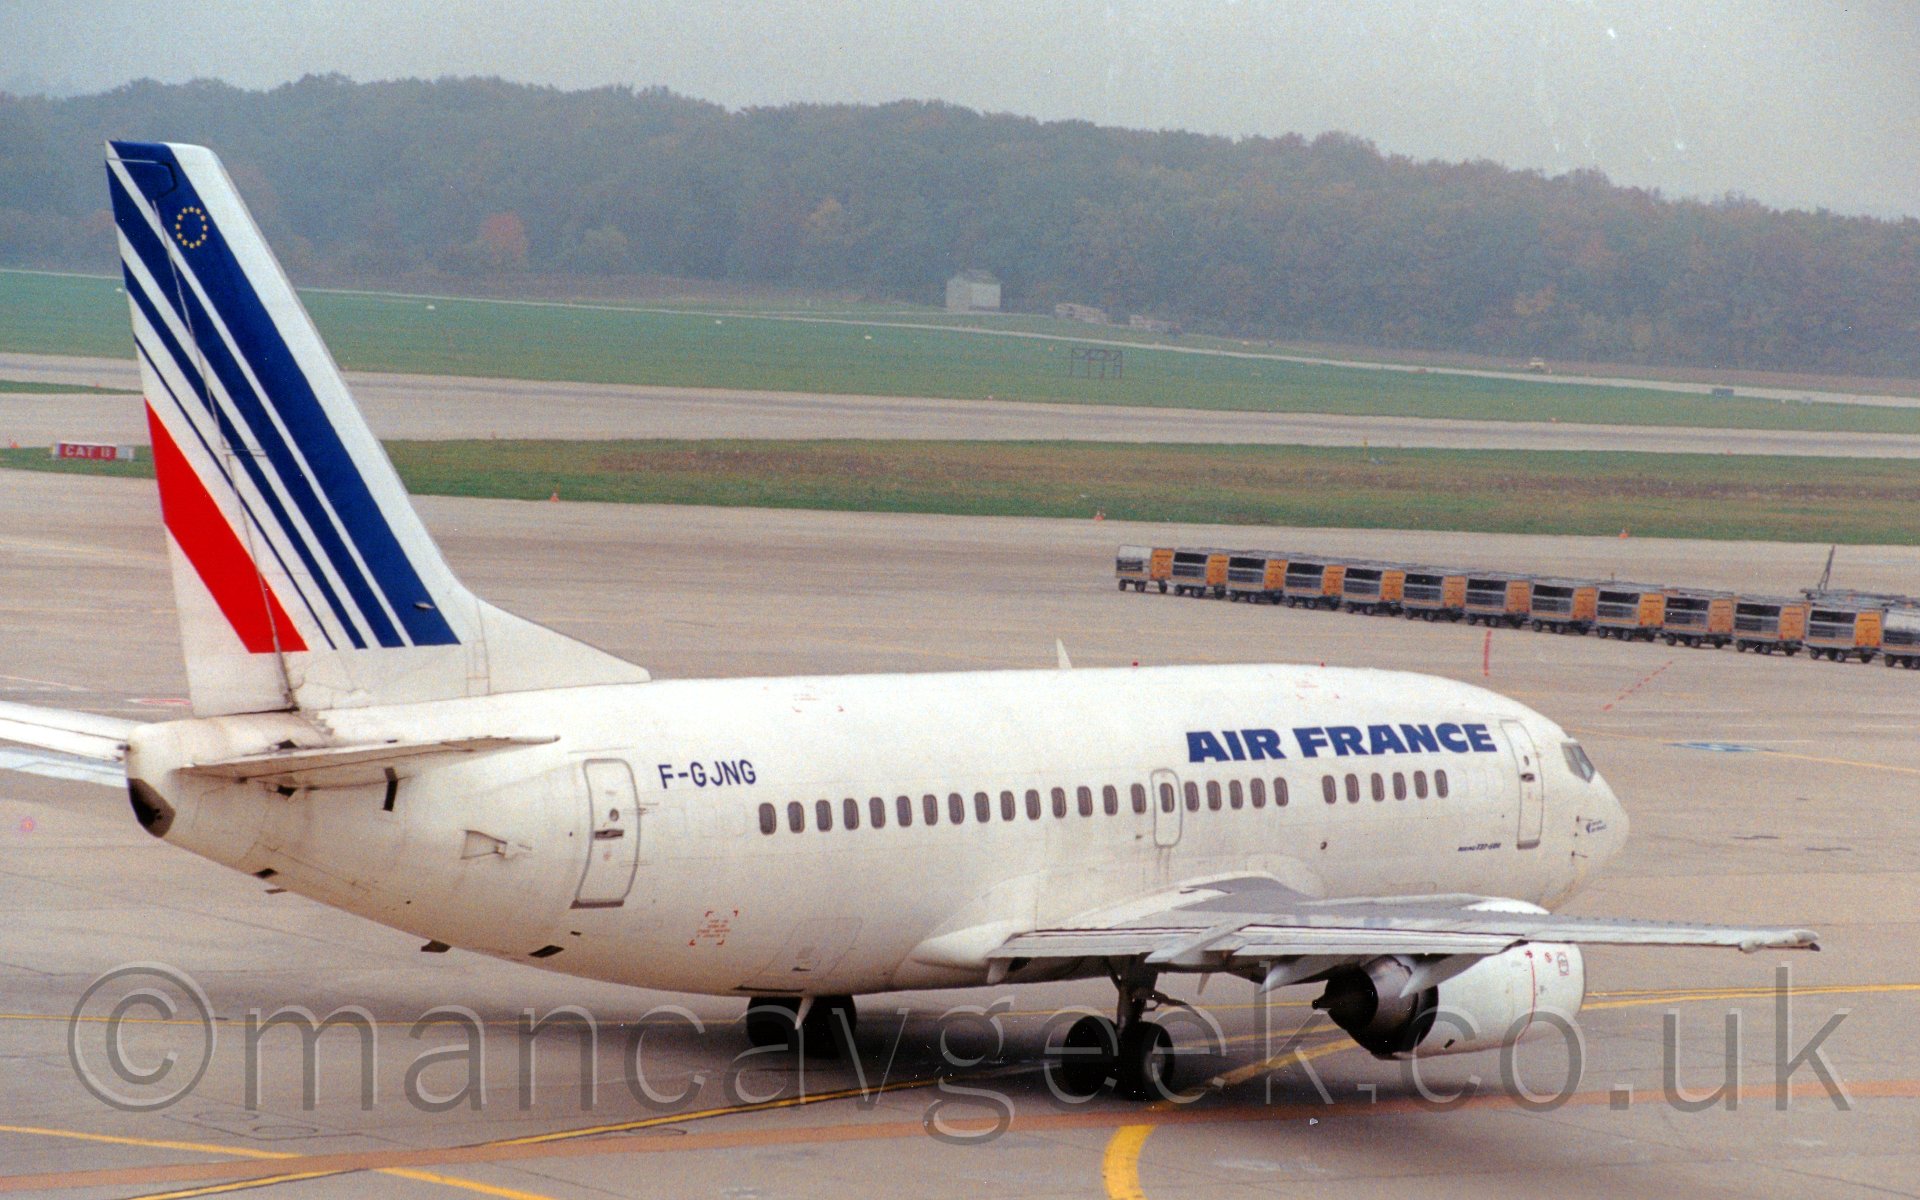 Side view of a twin engined jet airliner taxiing from left to rigtht and slightly away from the camera. The plane is mostly white, with blue "Air France" titles on the upper forward fuselage, and the registration "F-GJNG" on the upper reaer fuselage. The tail is white, with a series of diagonal blue stripes, getting thinner as they move to the rear, and a single red stripe. In the backgrounhd, a line of grey and yellow lugage carts stretch across the middle right of the frame, with grey taxiways and grassed areas leading up to trees meeting the hazy grey sky in the distance.